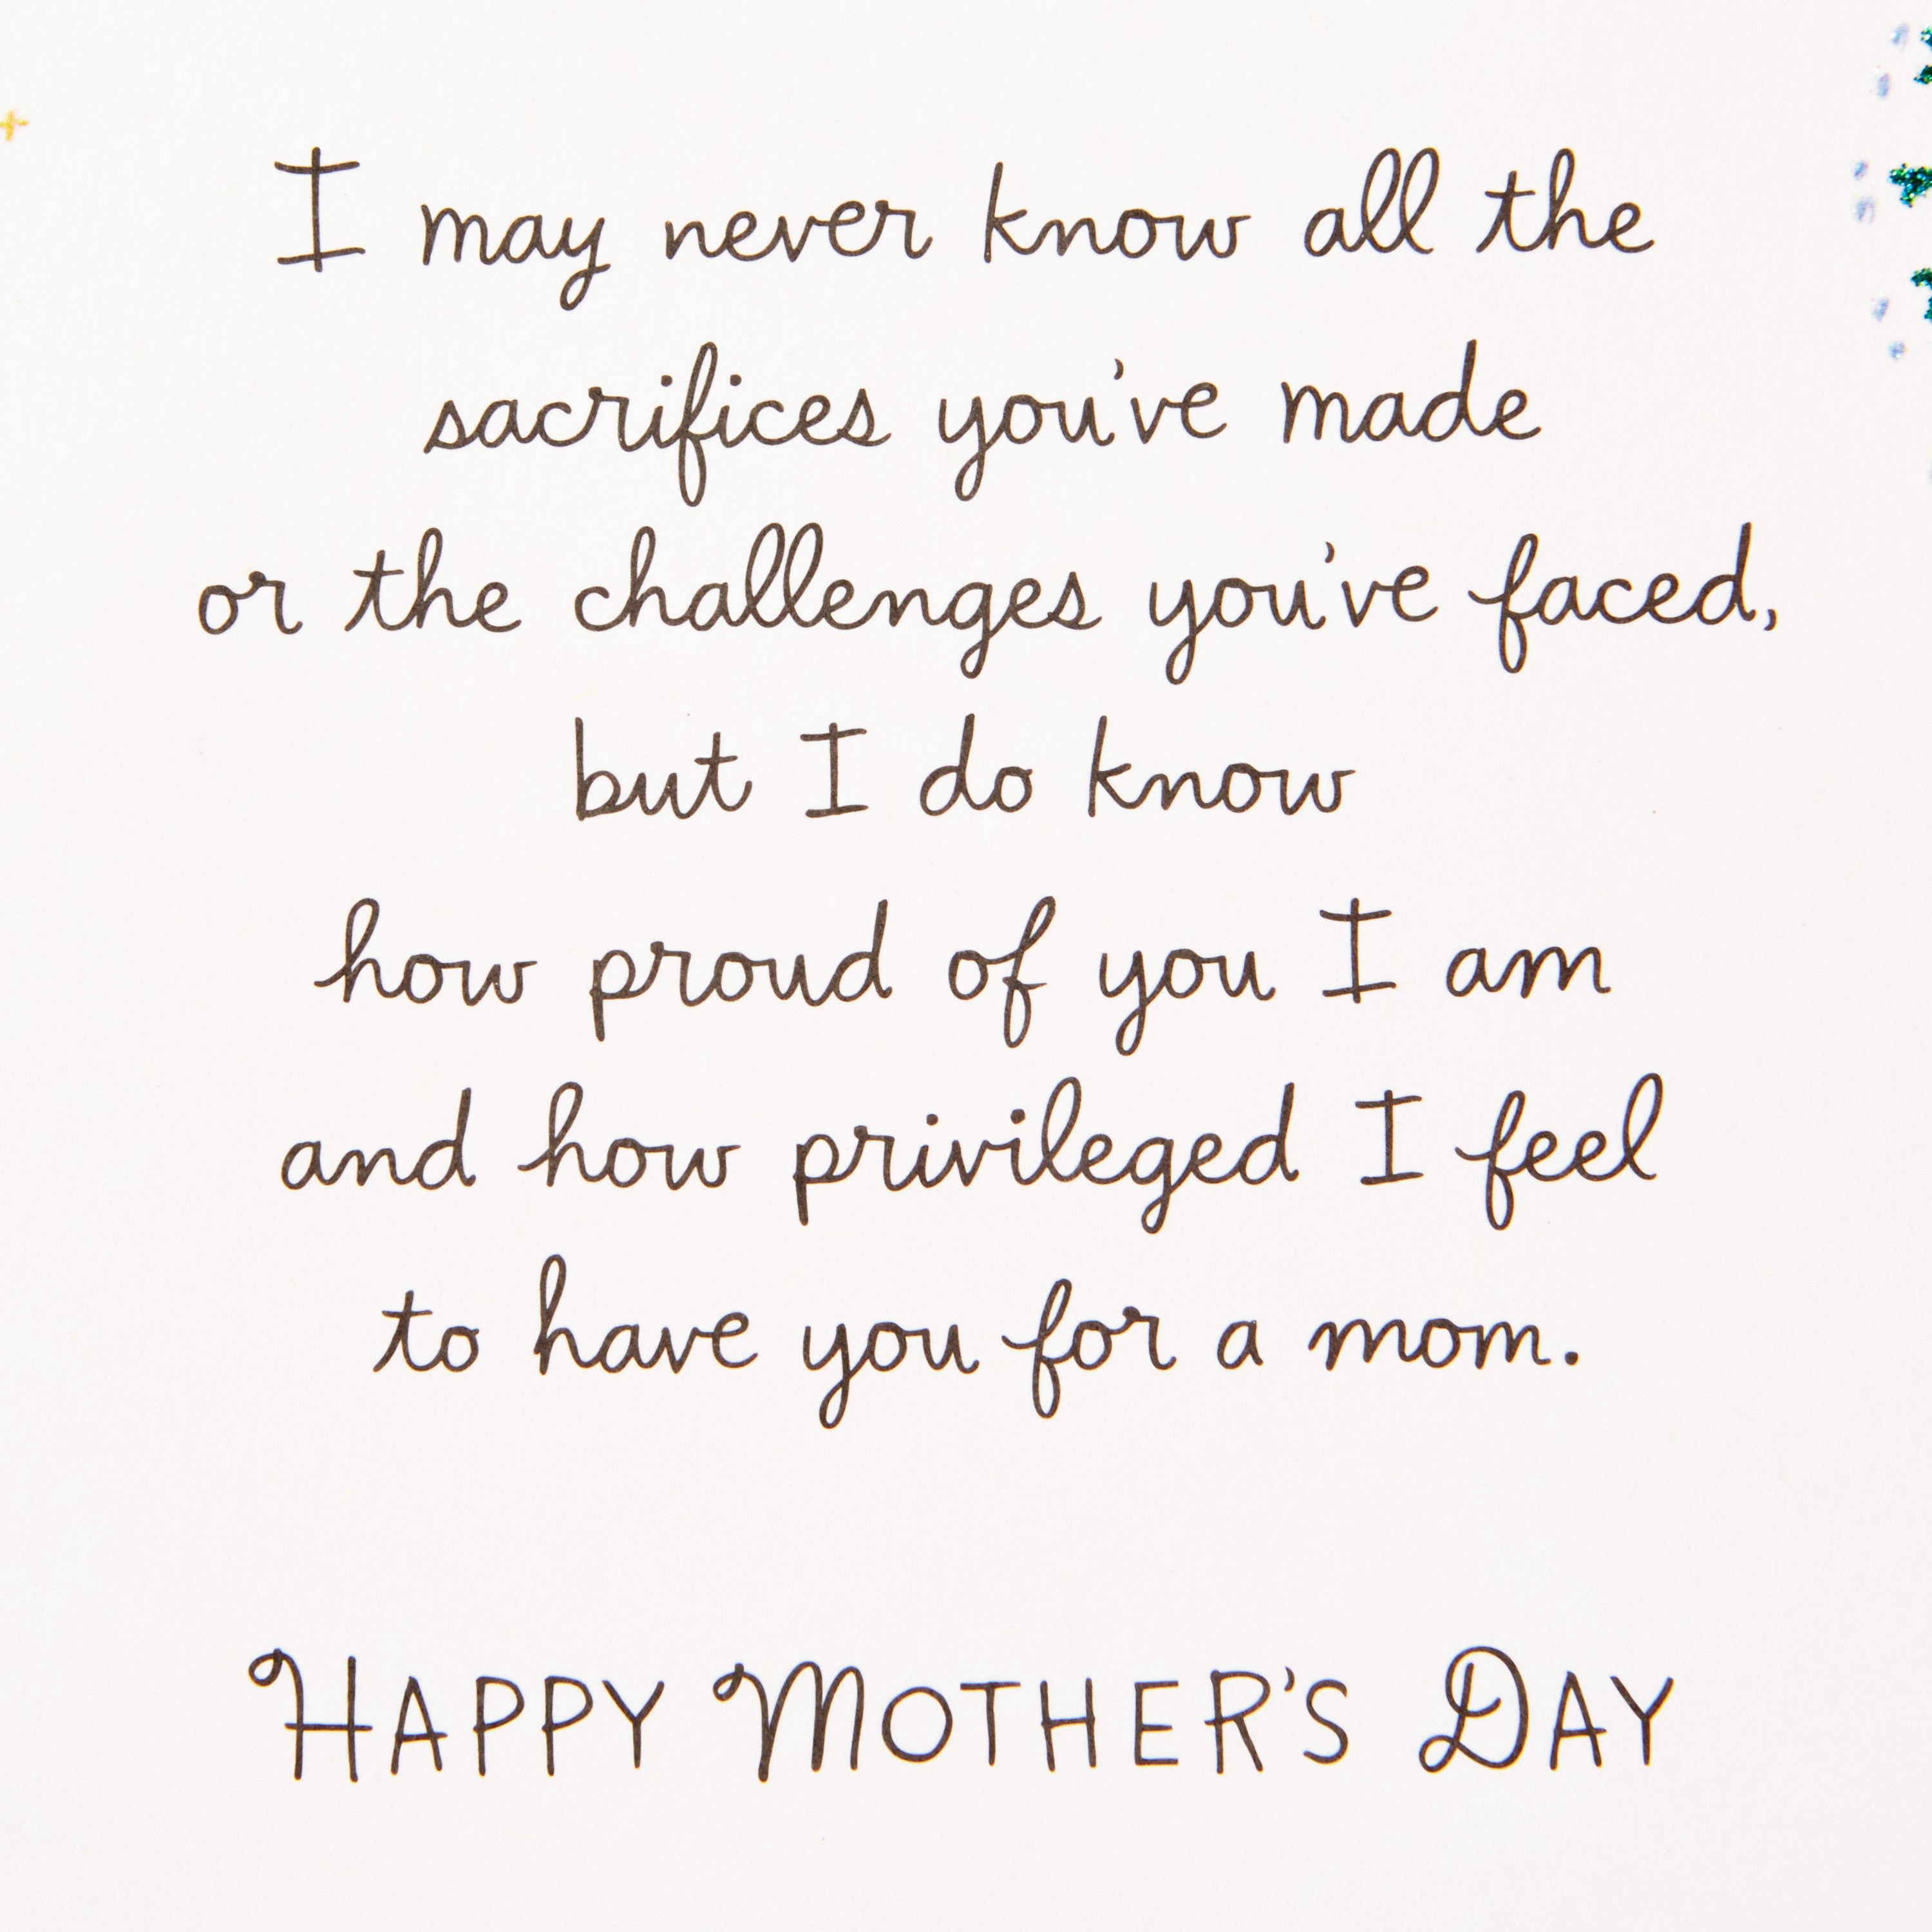 Mothers Day Card for Mom (Your Life Has Shaped My Life)